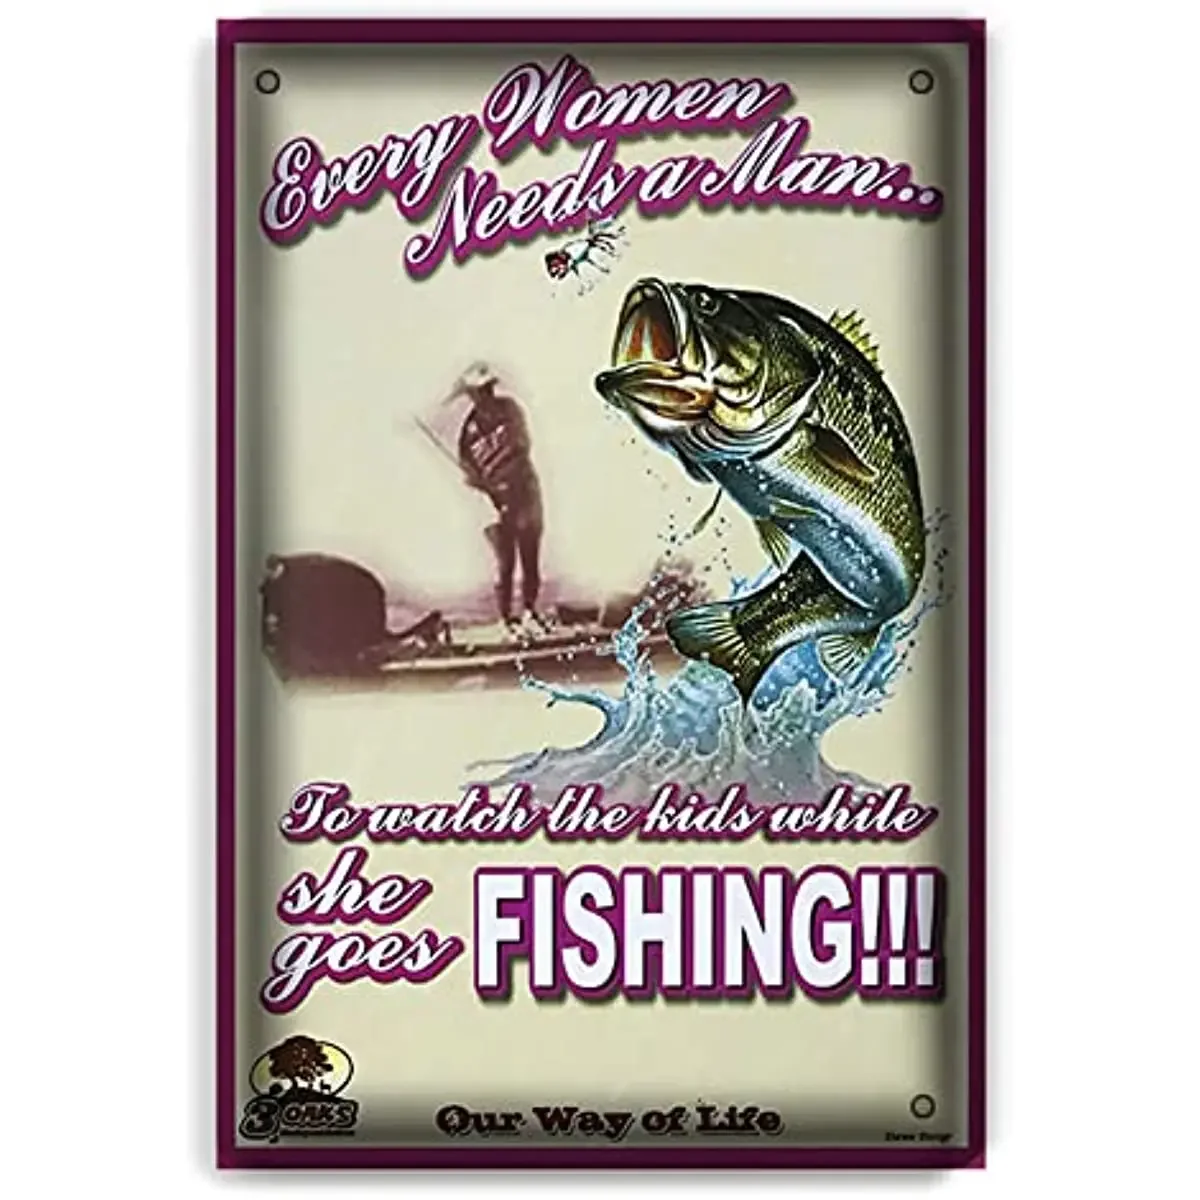 

Retro Tin Sign Metal Poster Vintage Wall Decor Poster Fishing for Pub Restaurants Cafe Club Plaque Man Cave Wall 8x12 Inch